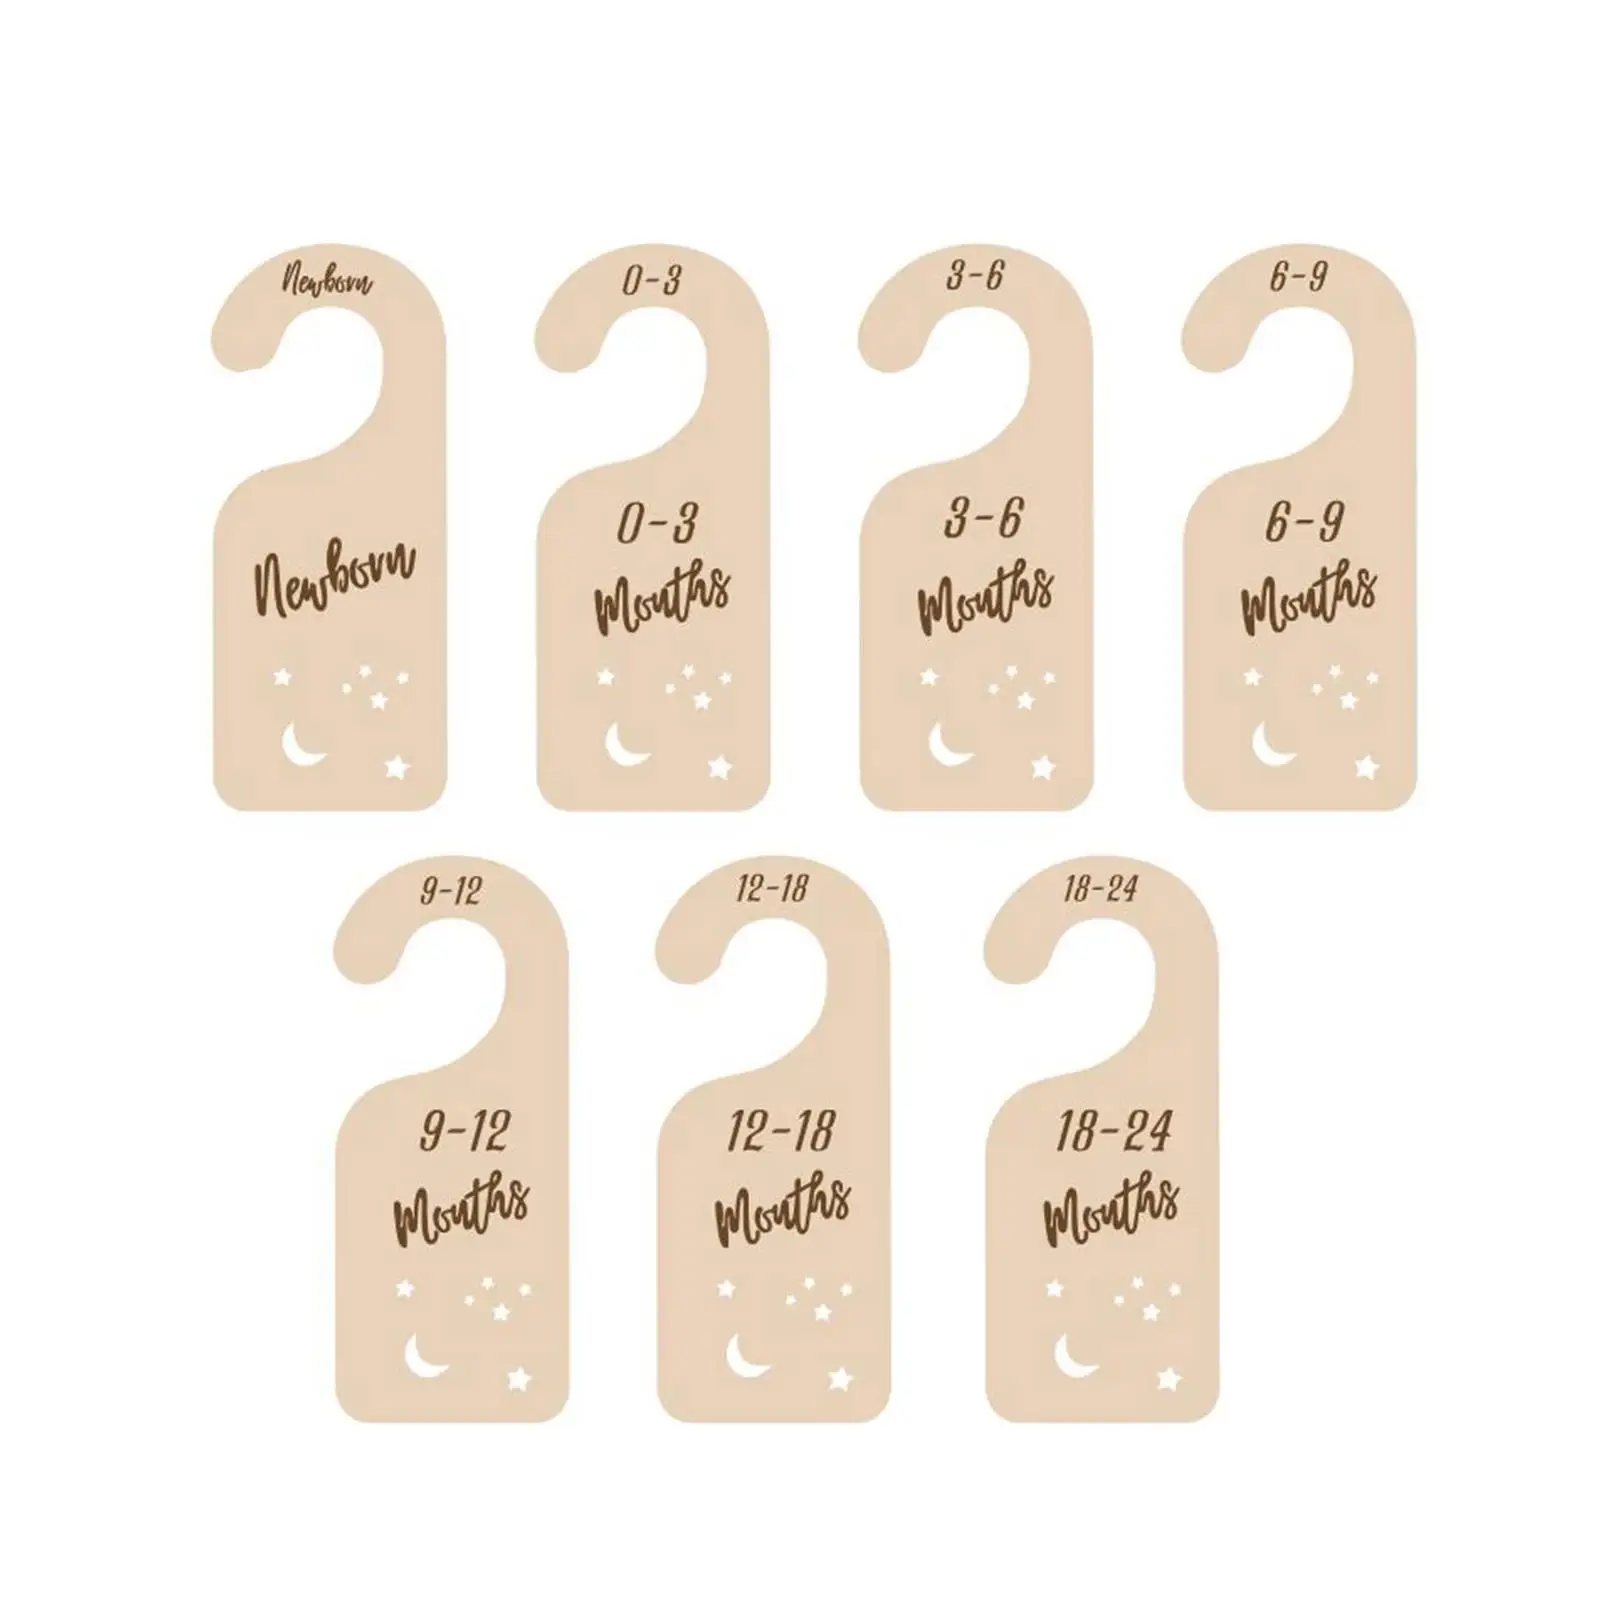 7x Adorable Baby Closet Dividers Organizer Double Sided Closet Baby Size Dividers for Photography Props Newborn Shower Gifts